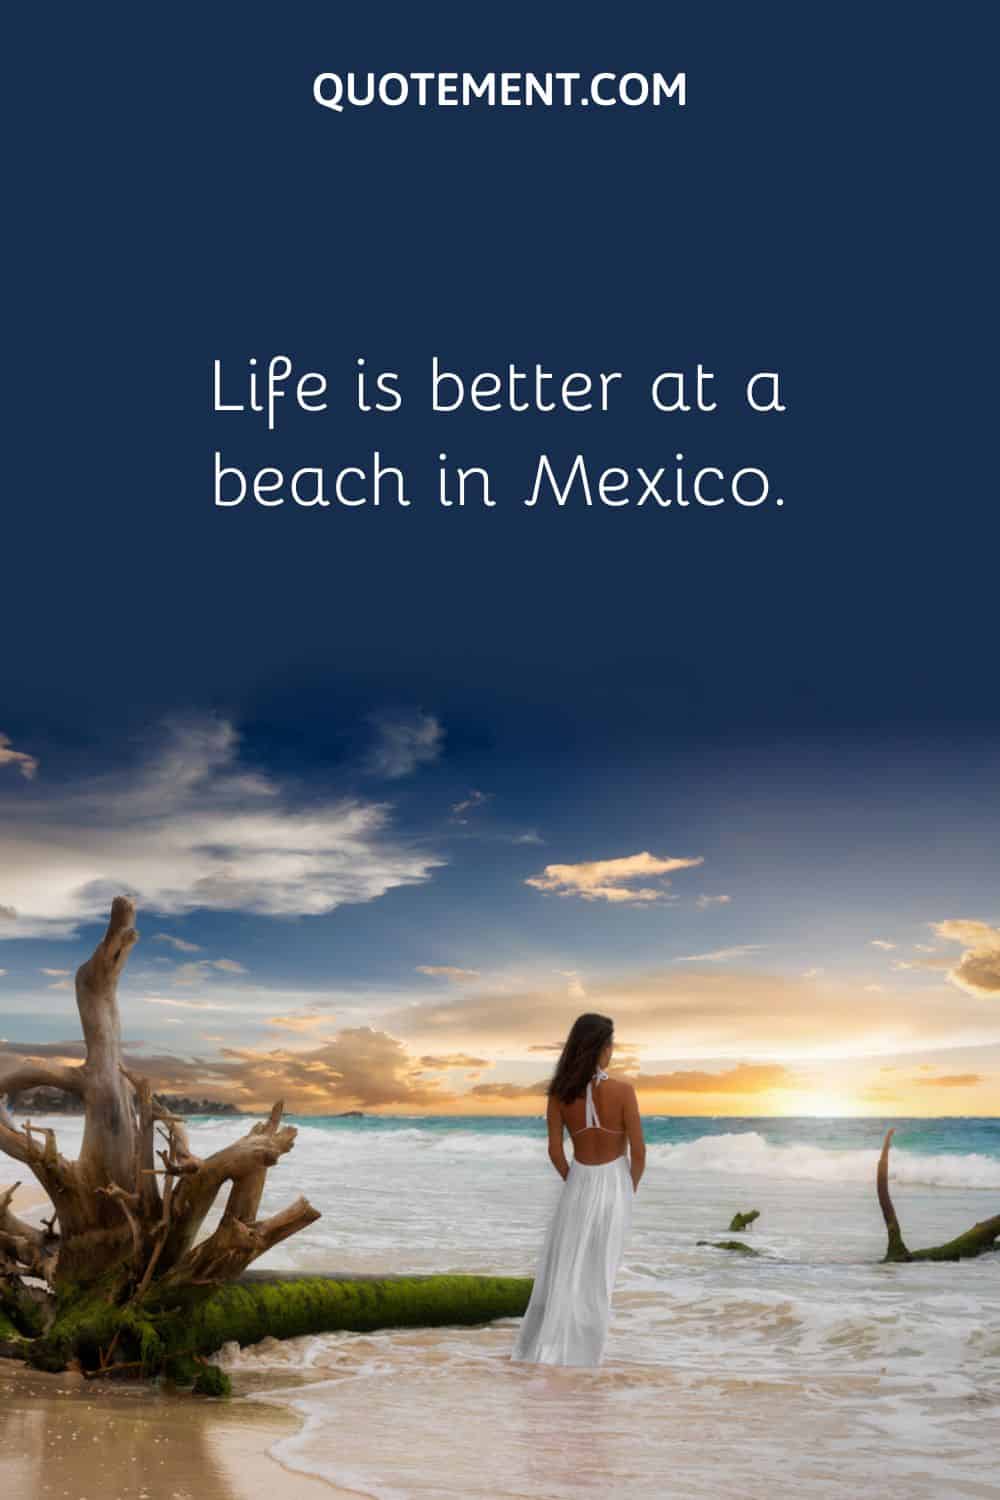 Life is better at a beach in Mexico